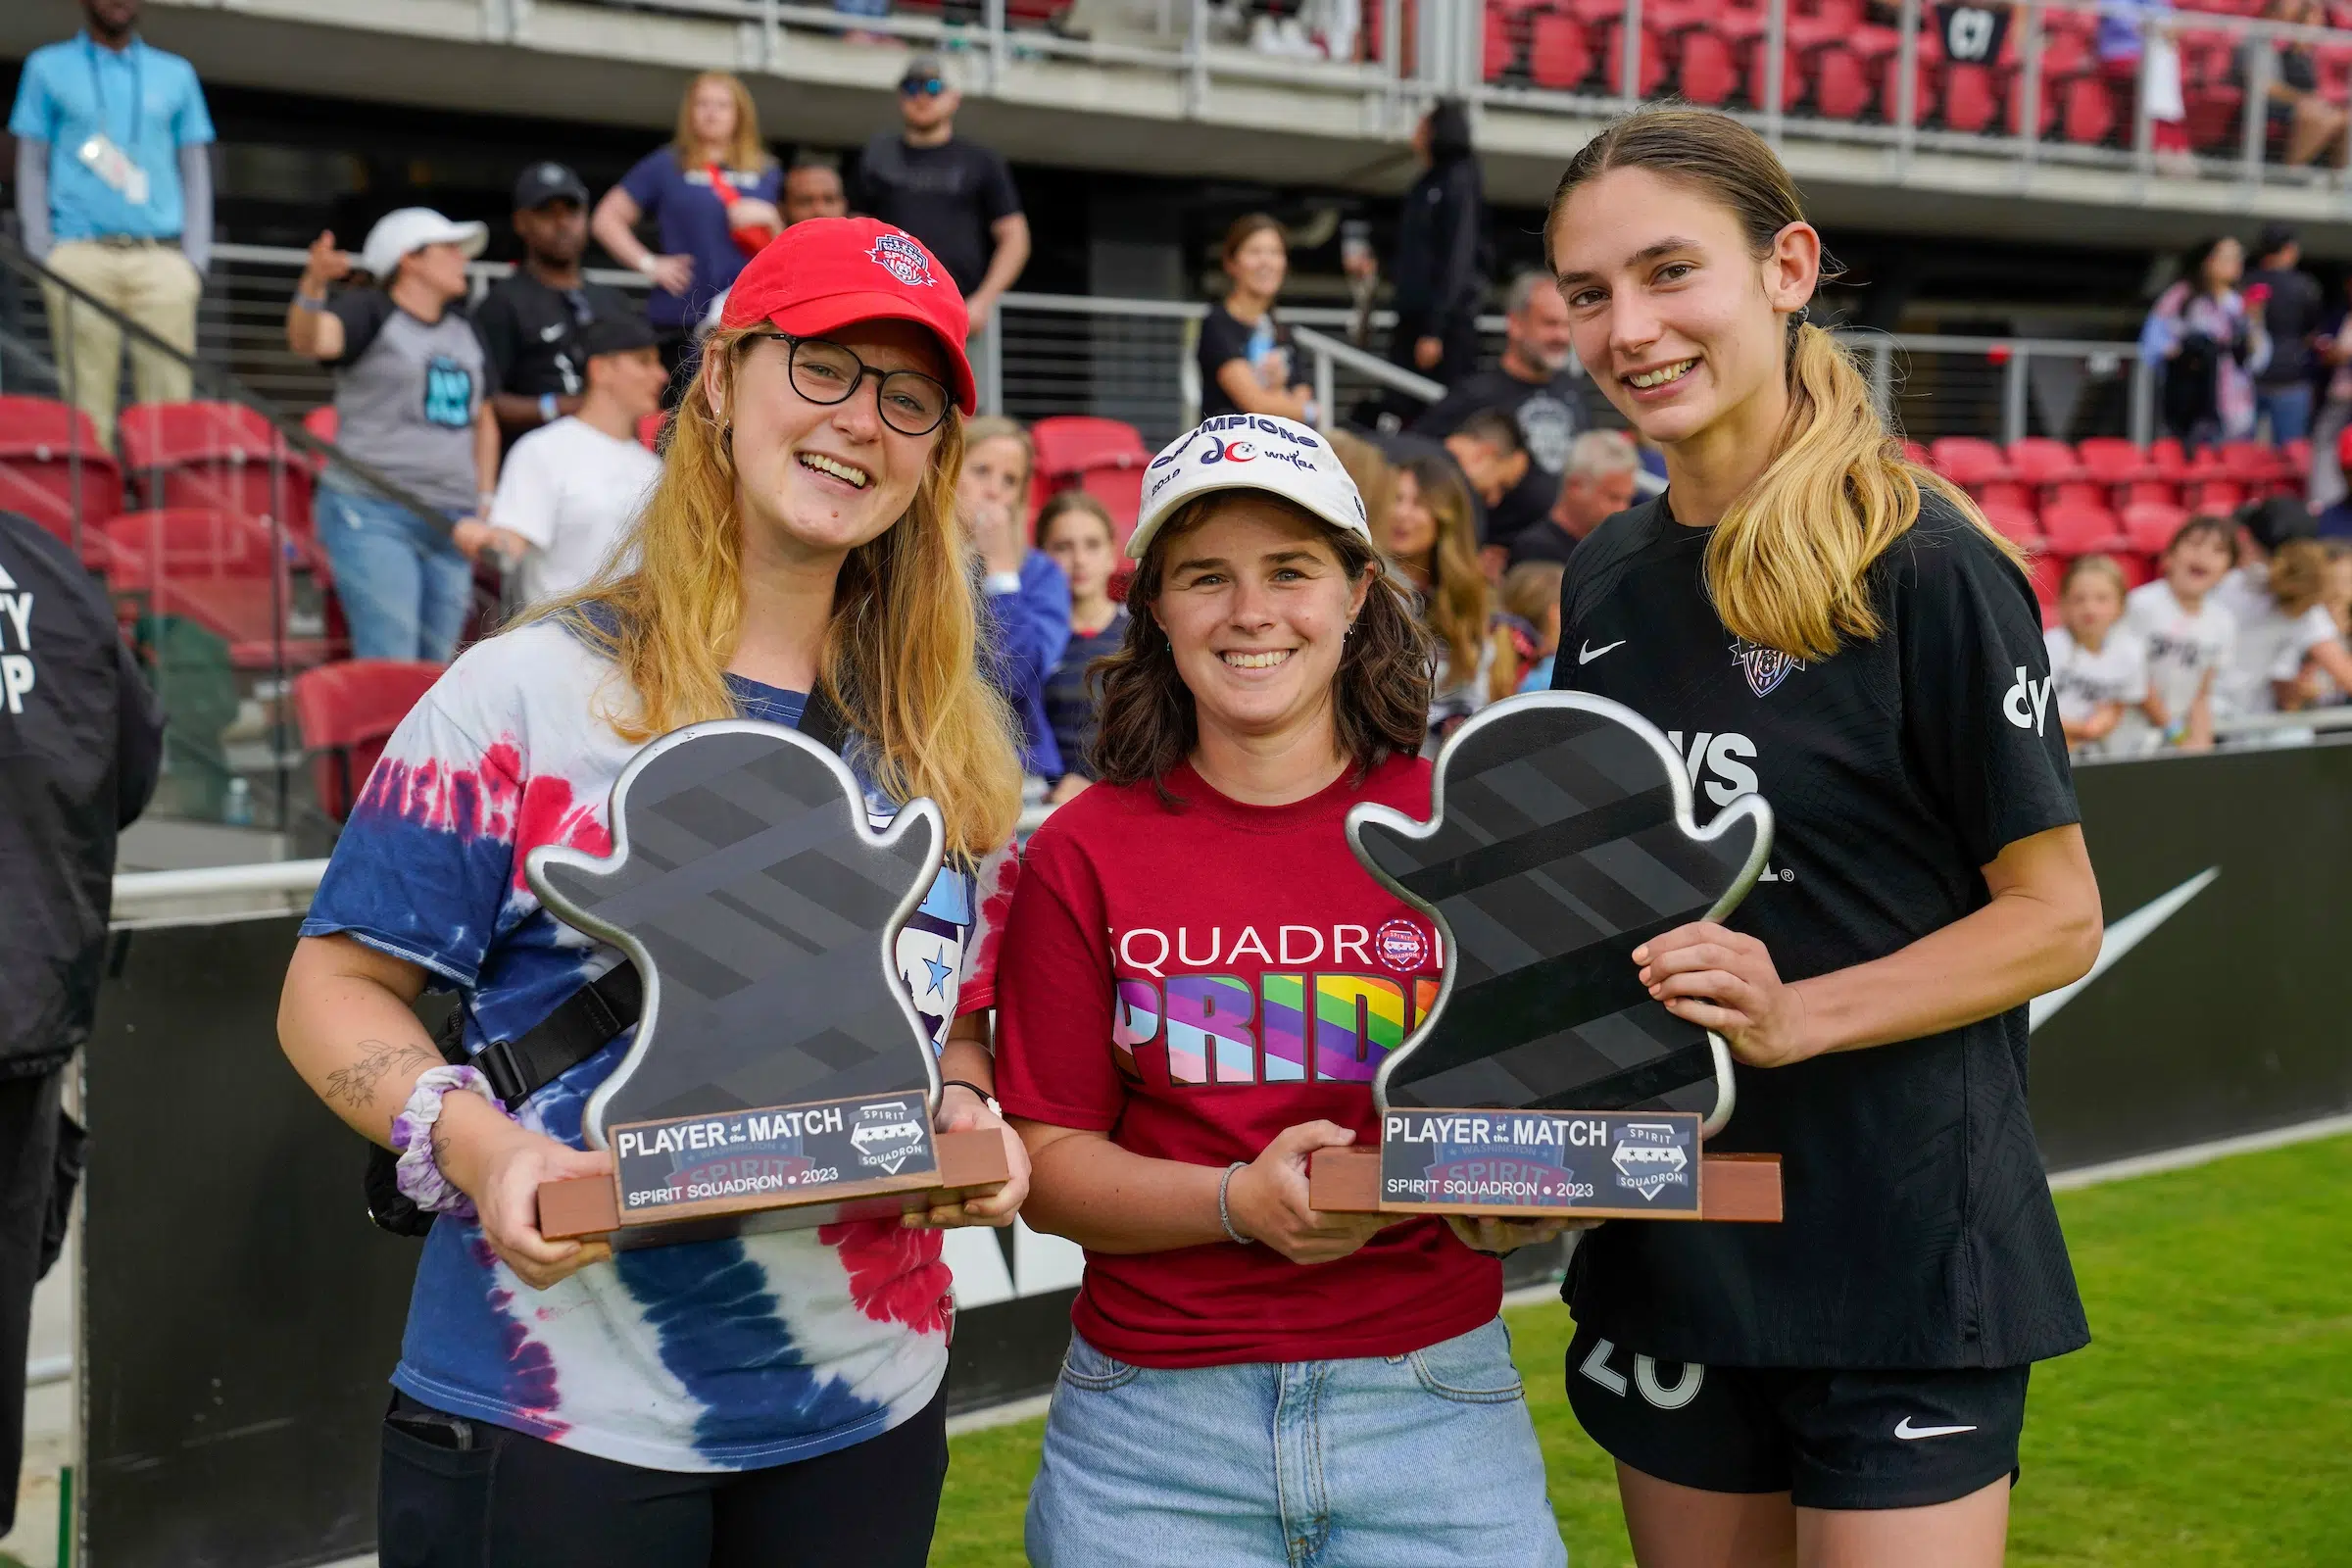 Paige Metayer holds a black, ghost-emoji shaped trophy next to two fans from the Spirit Squadron.